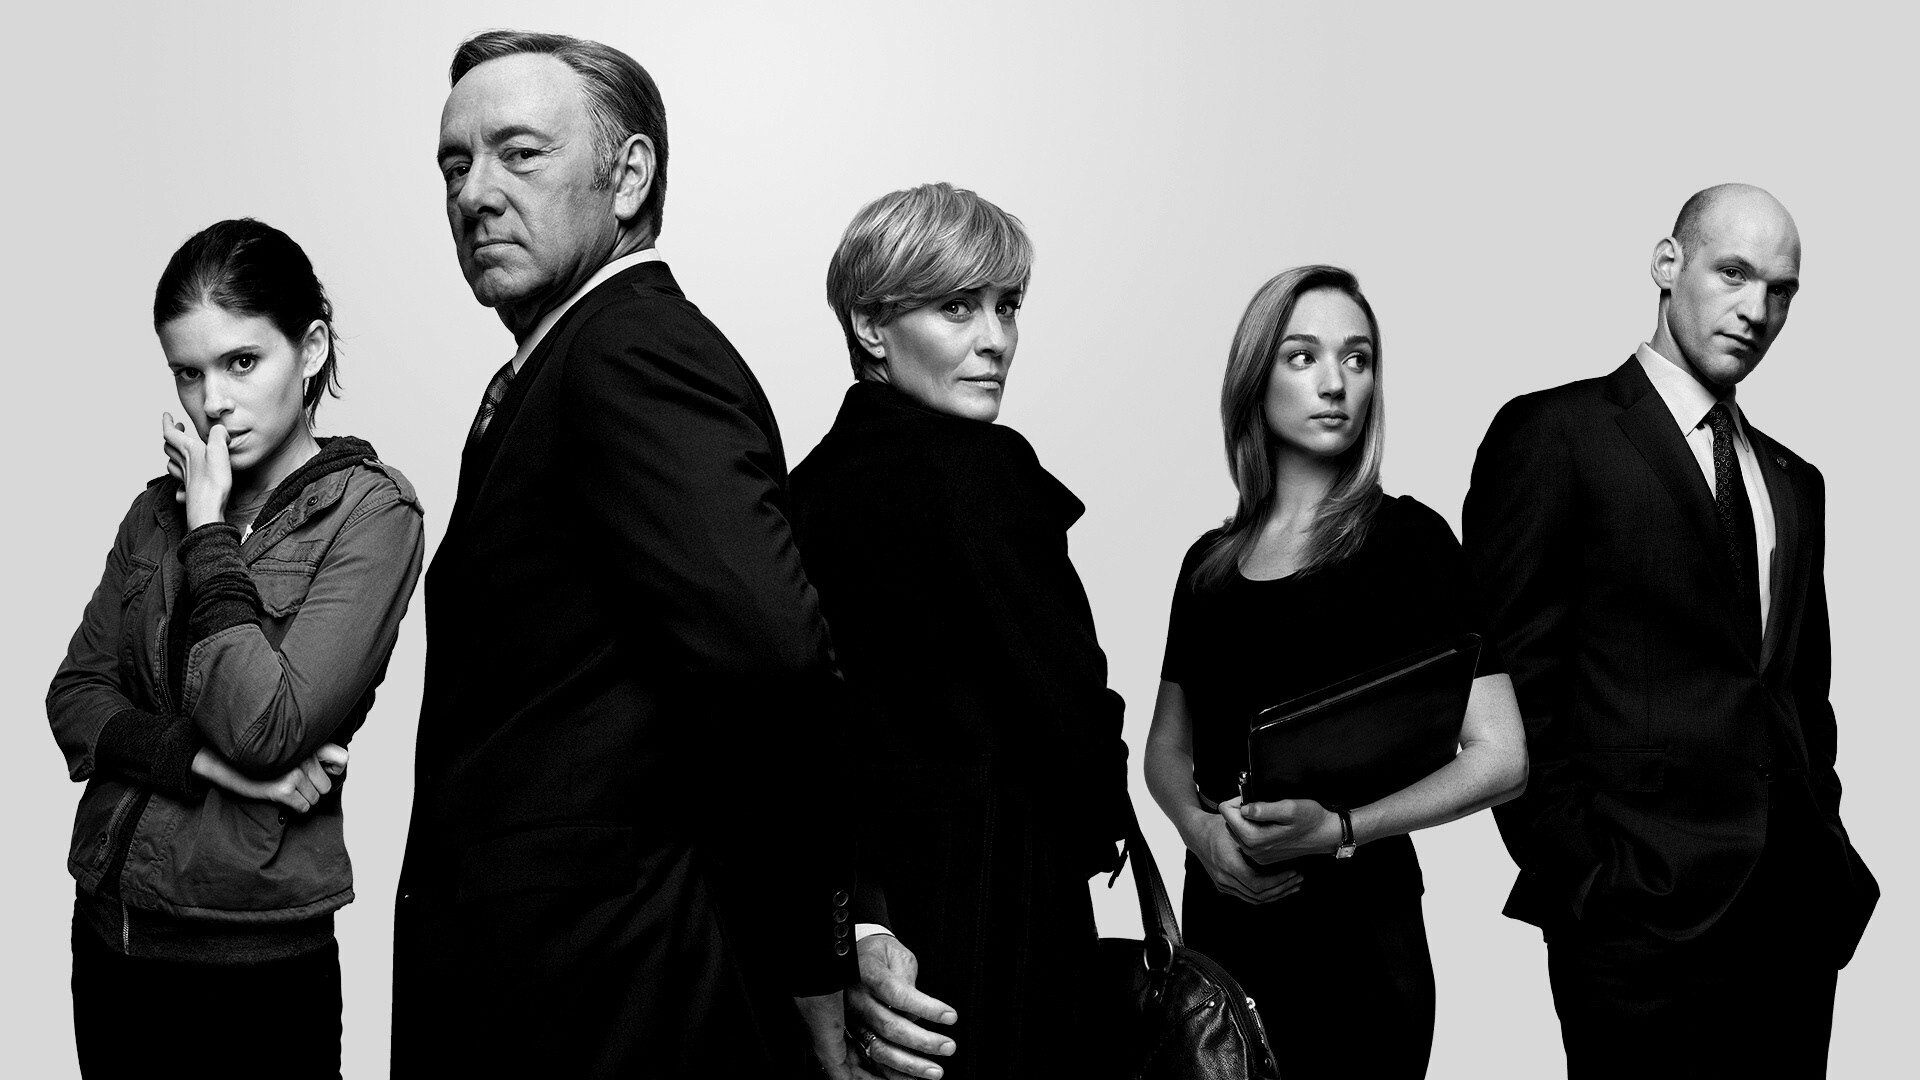 House of Cards: Peter Russo, Zoe Barnes, Christina Gallagher, Frank Underwood, Claire Hale Underwood. 1920x1080 Full HD Background.